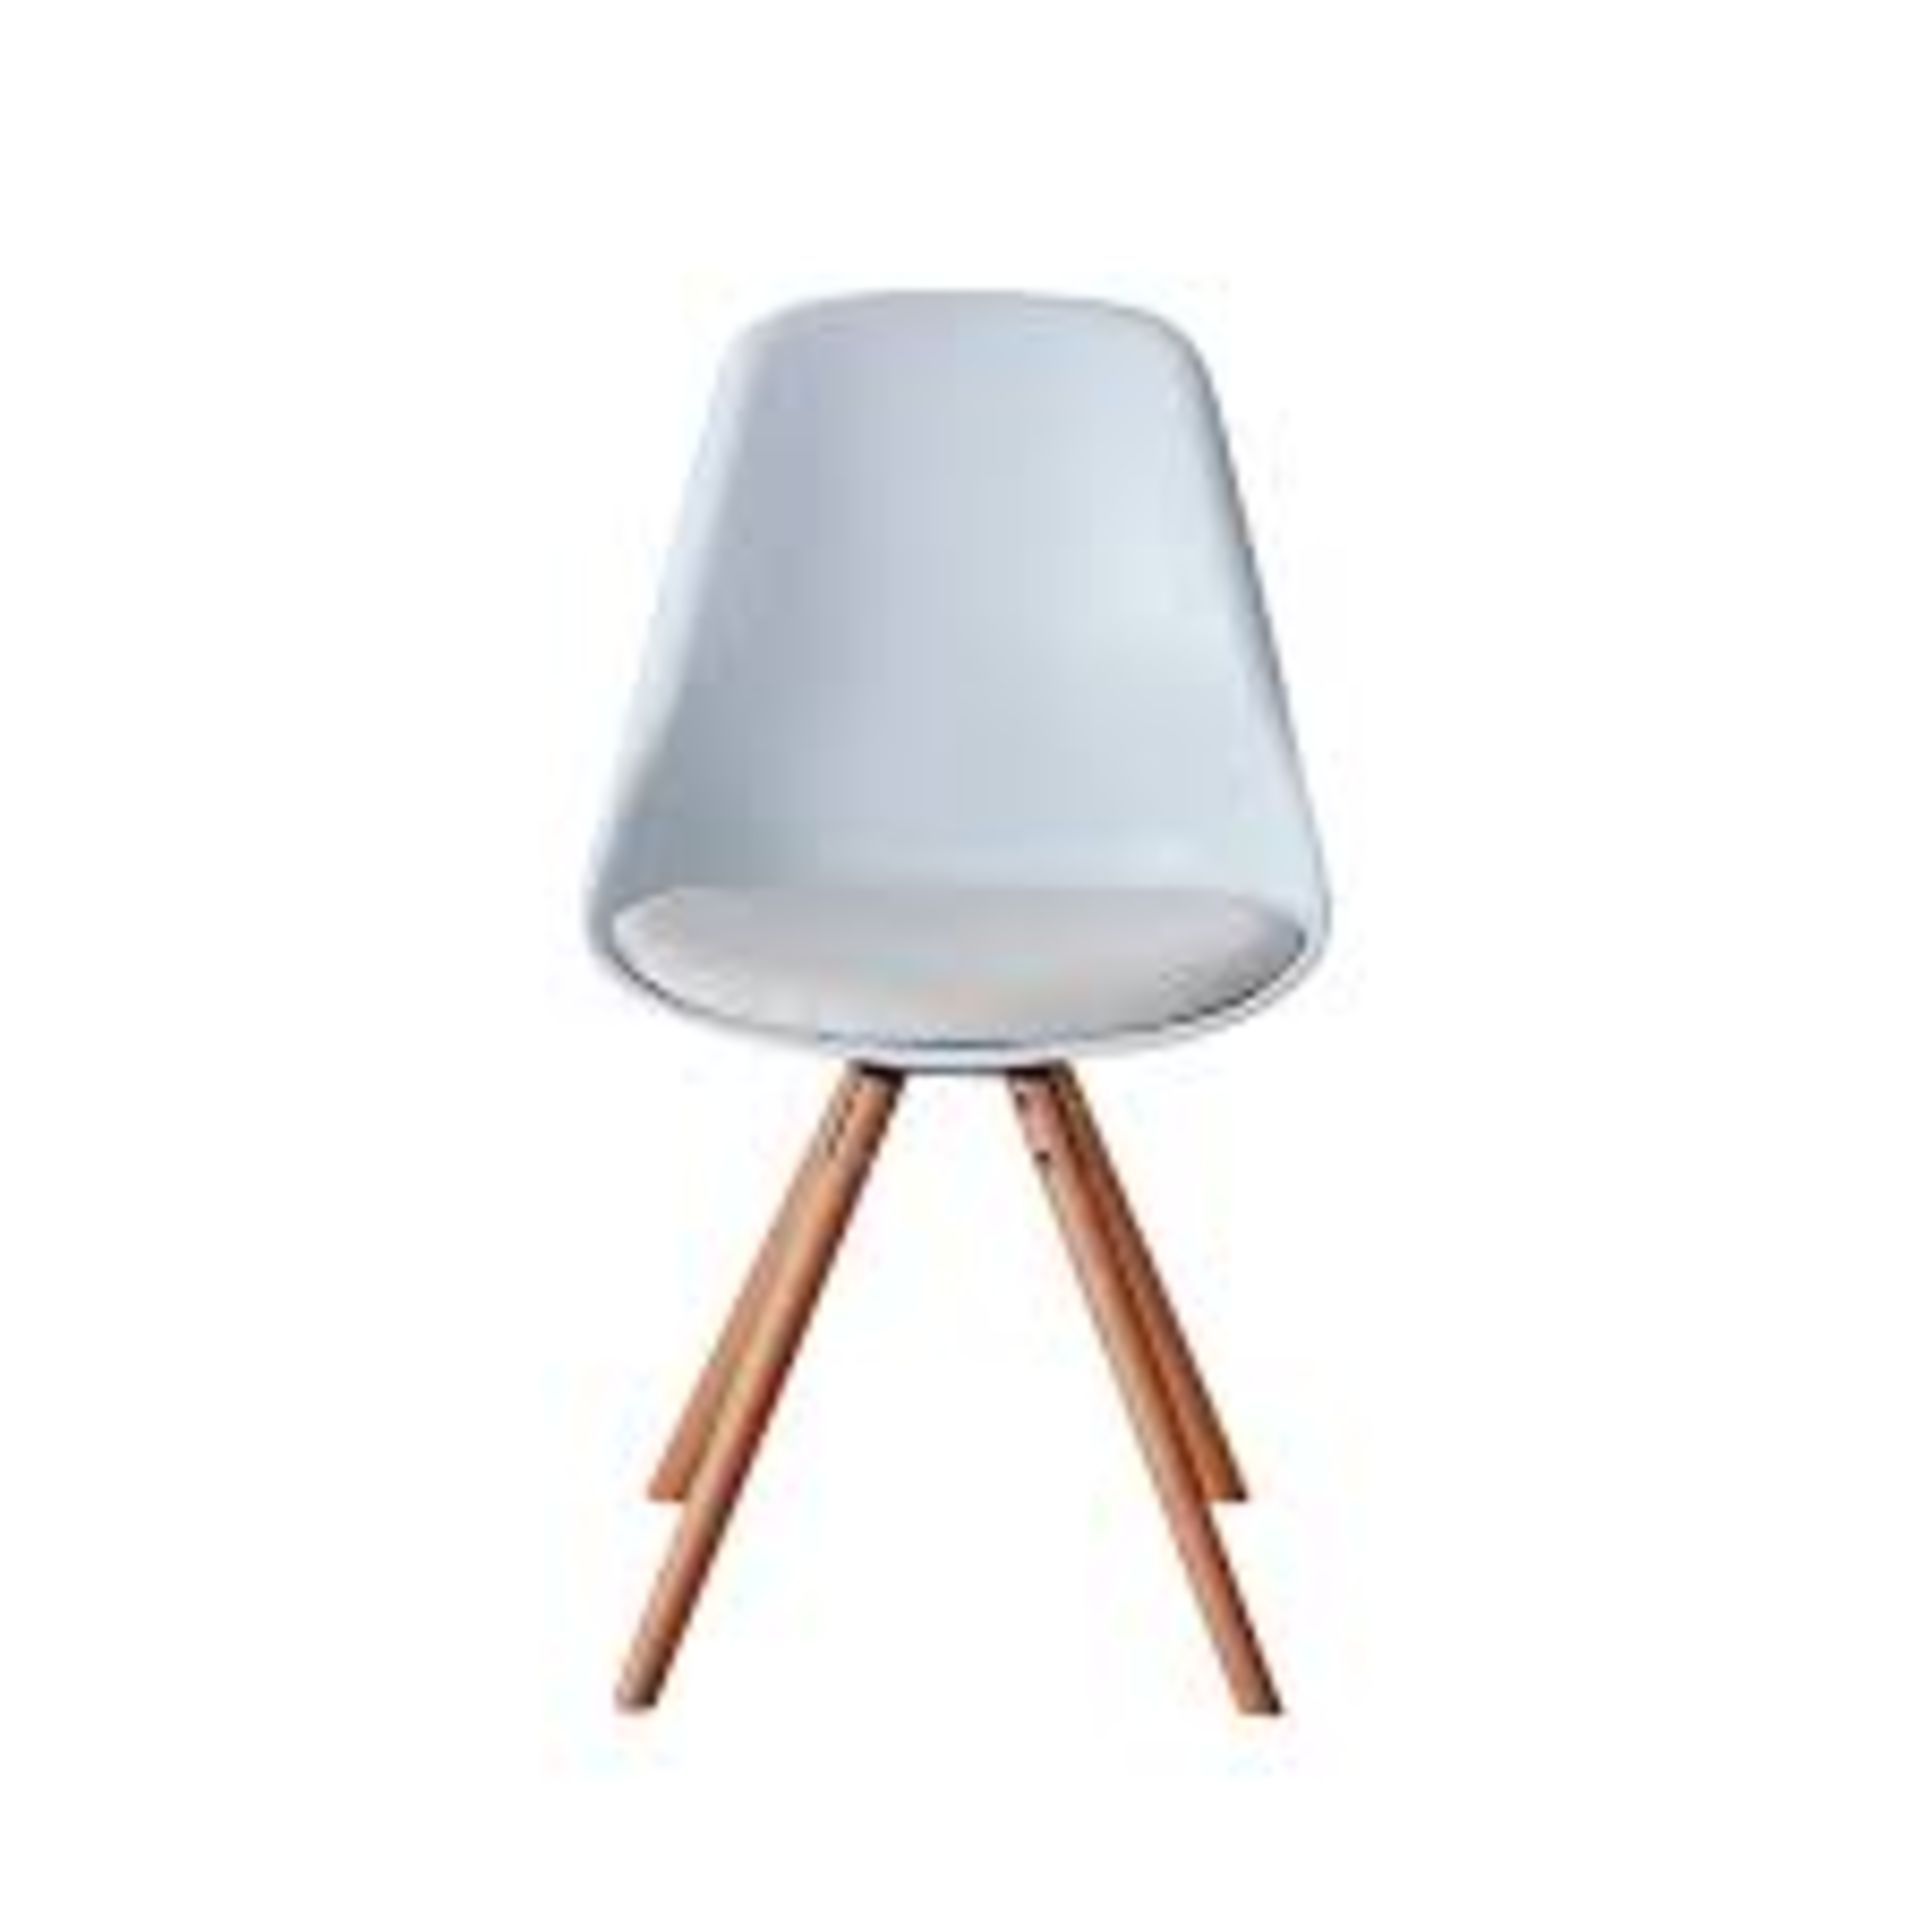 Set of 4 x 'TURNER' Contemporary Scandinavian-style Dining Chairs in White - Mid Century Design With - Image 2 of 4